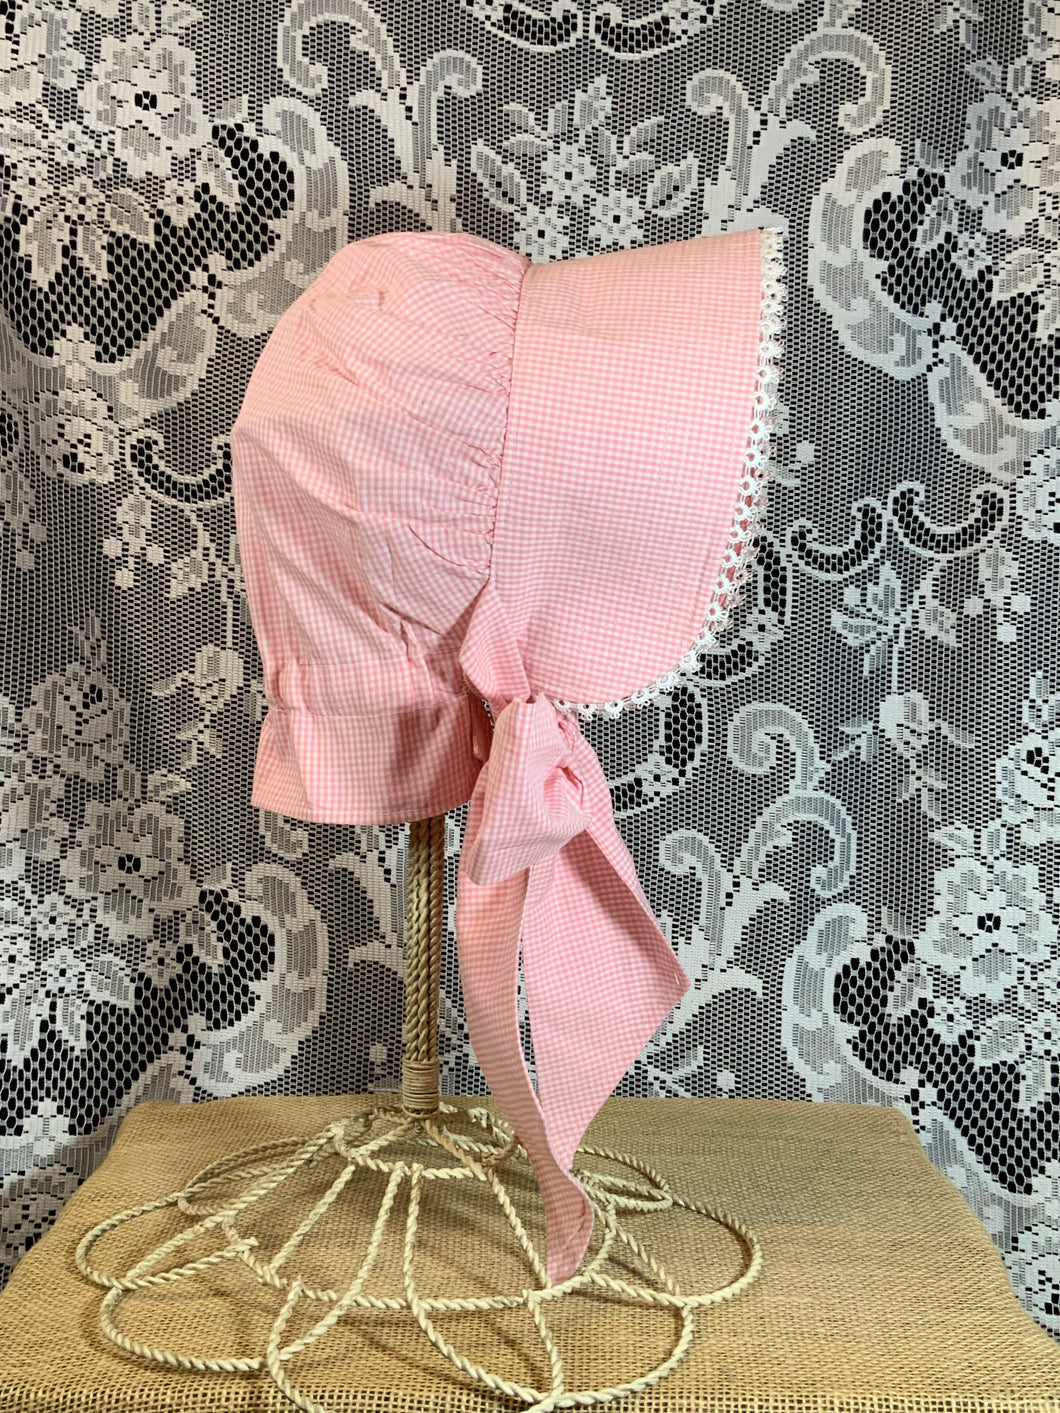 Pink & White Gingham Prairie Bonnet with Shuttle Tatted Edging